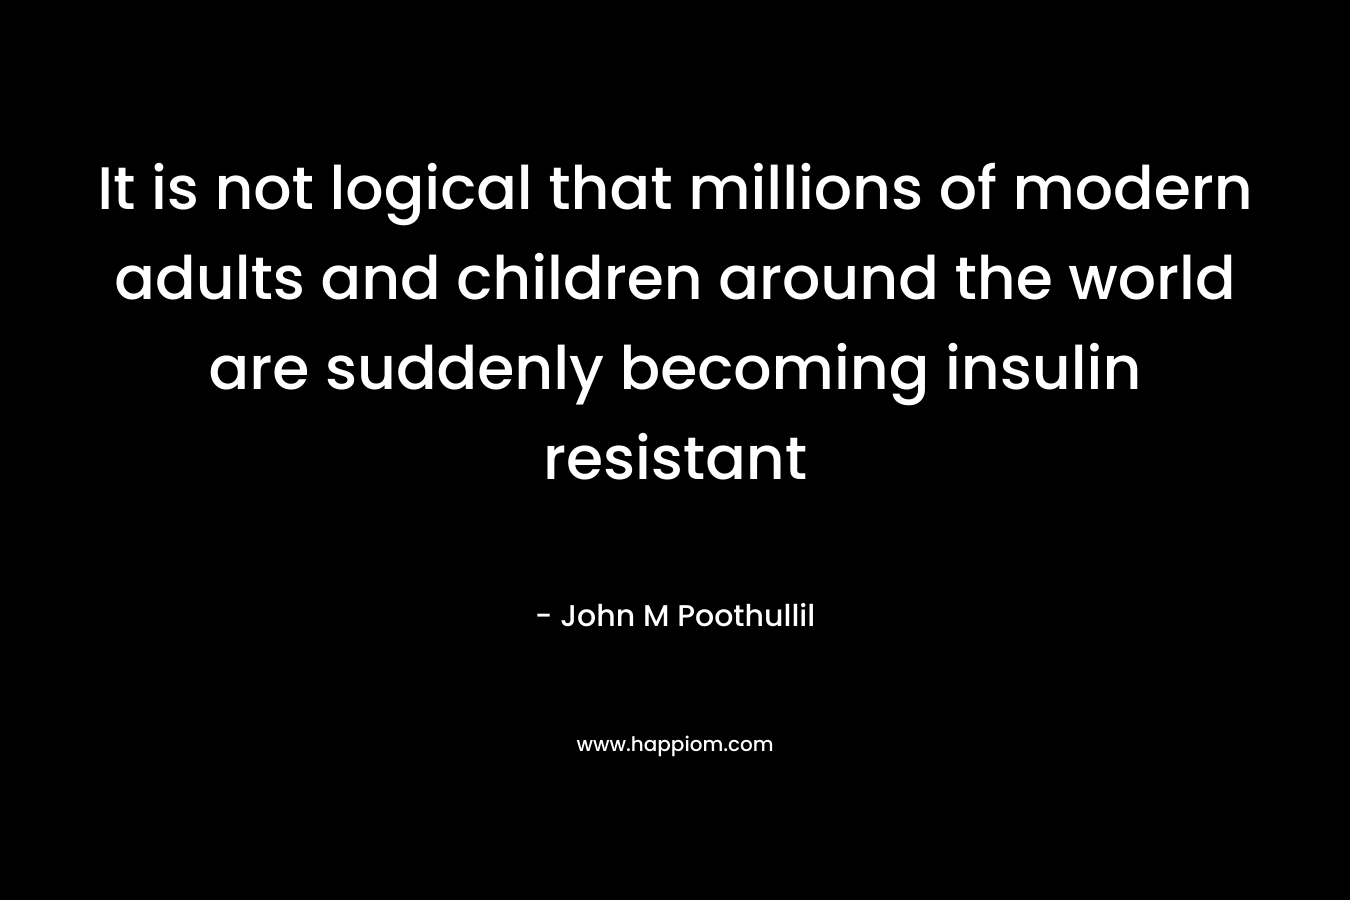 It is not logical that millions of modern adults and children around the world are suddenly becoming insulin resistant